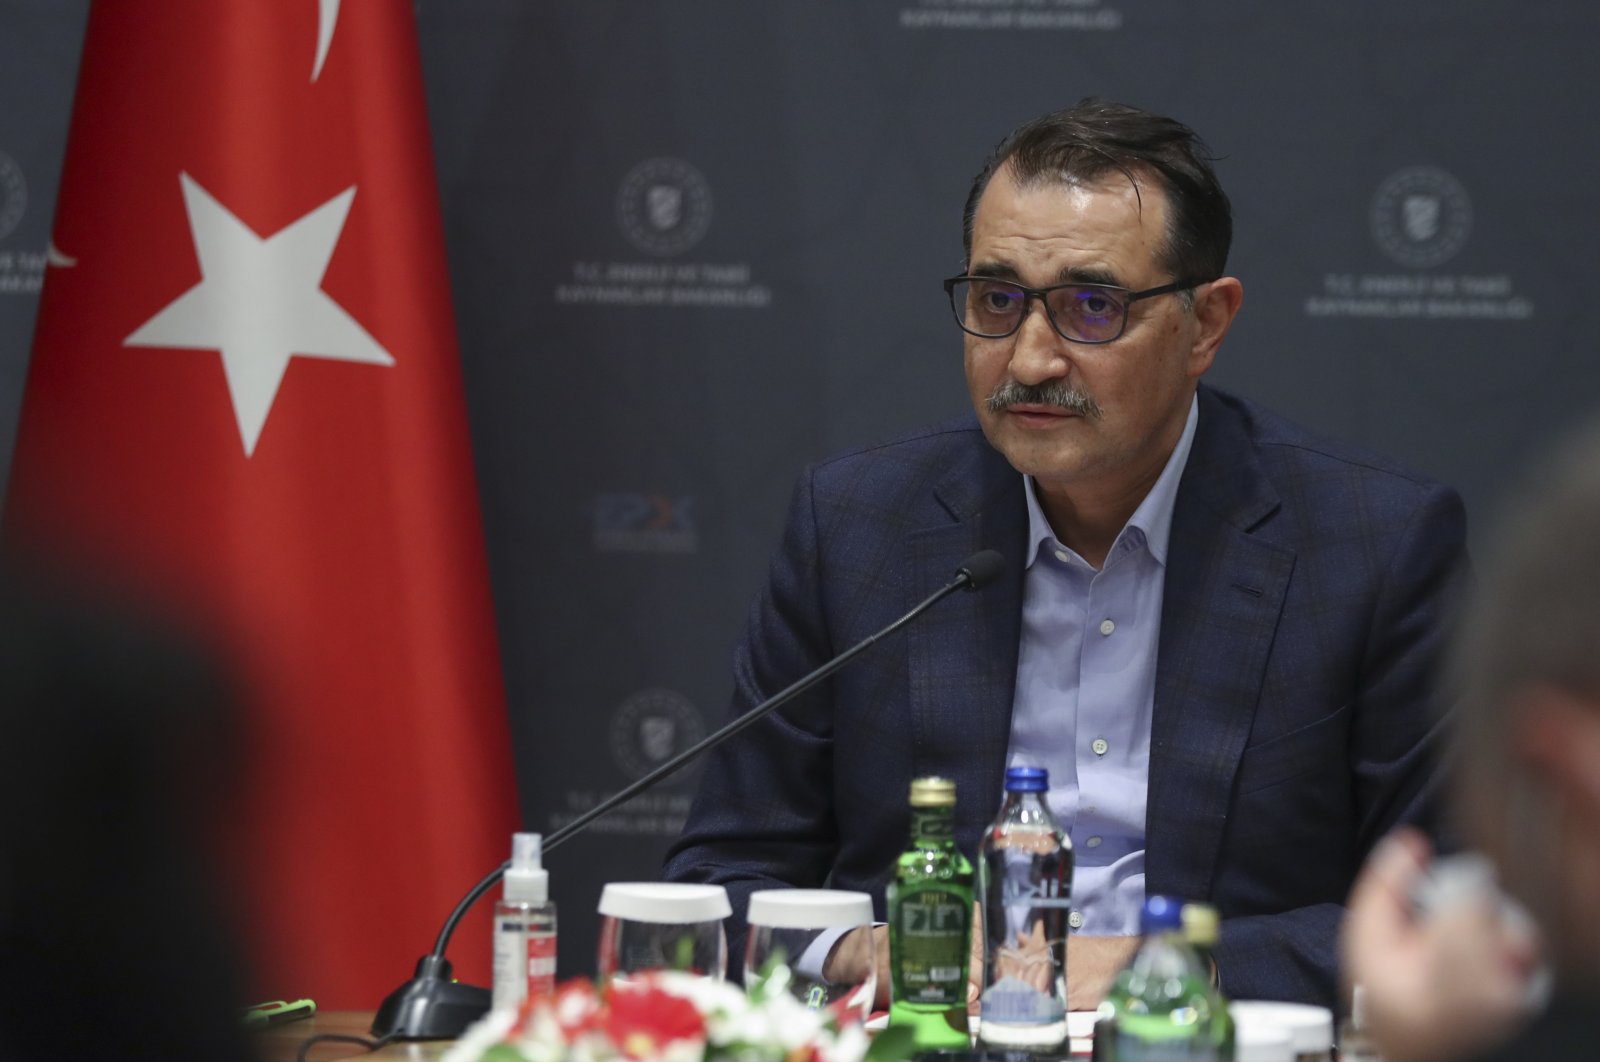 Energy and Natural Resources Minister Fatih Dönmez speaks during a press conference at the 11th Turkey Energy Summit in southern Antalya province, Turkey, Nov. 23, 2021 (AA Photo)